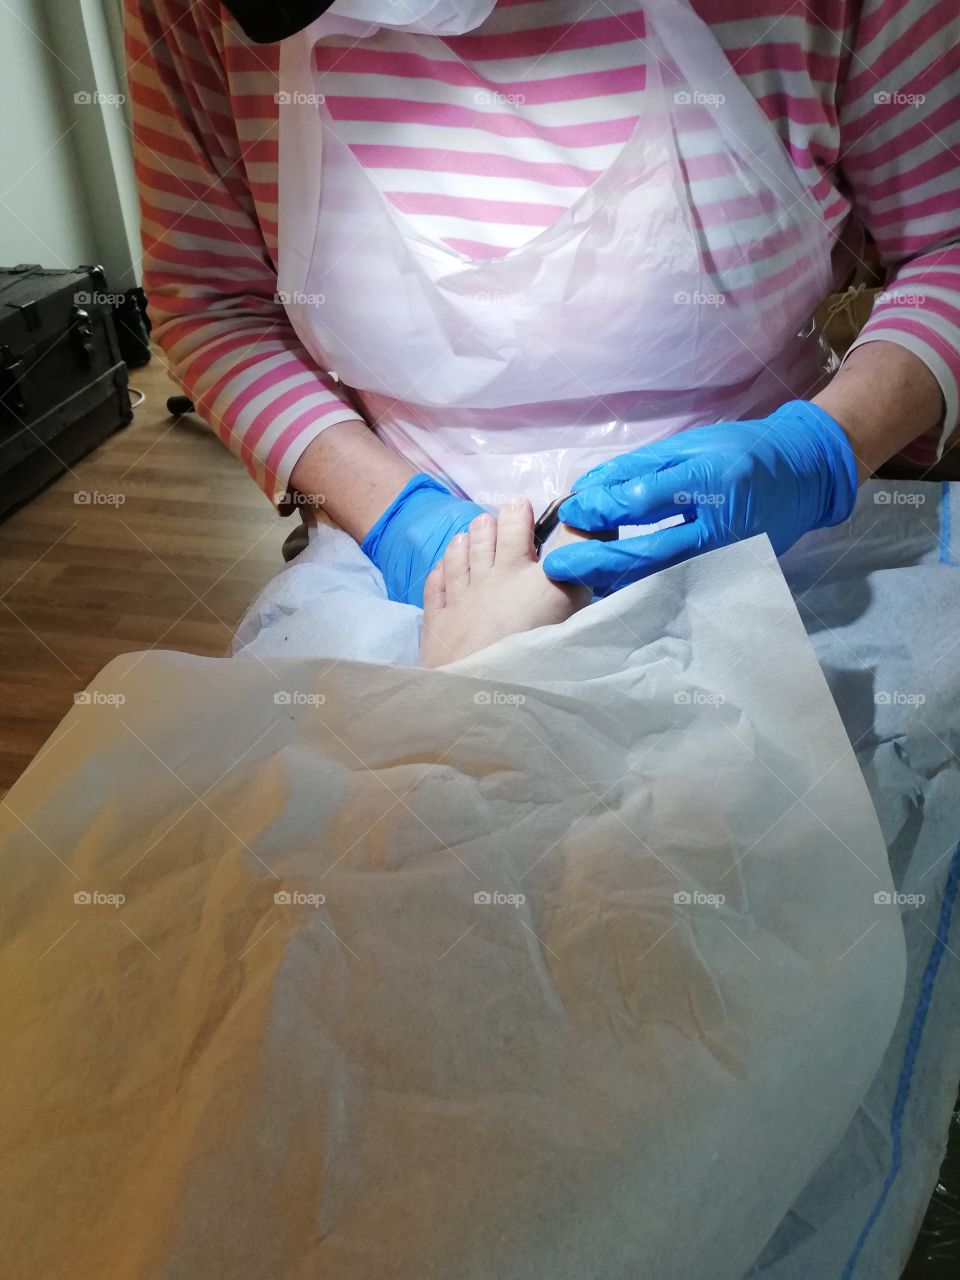 A woman in a pink white striped shirt making pedicure, wearing a plastic apron and blue gloves, holding a foot of a client between her hands, the rest of the body is protected with a white cover.